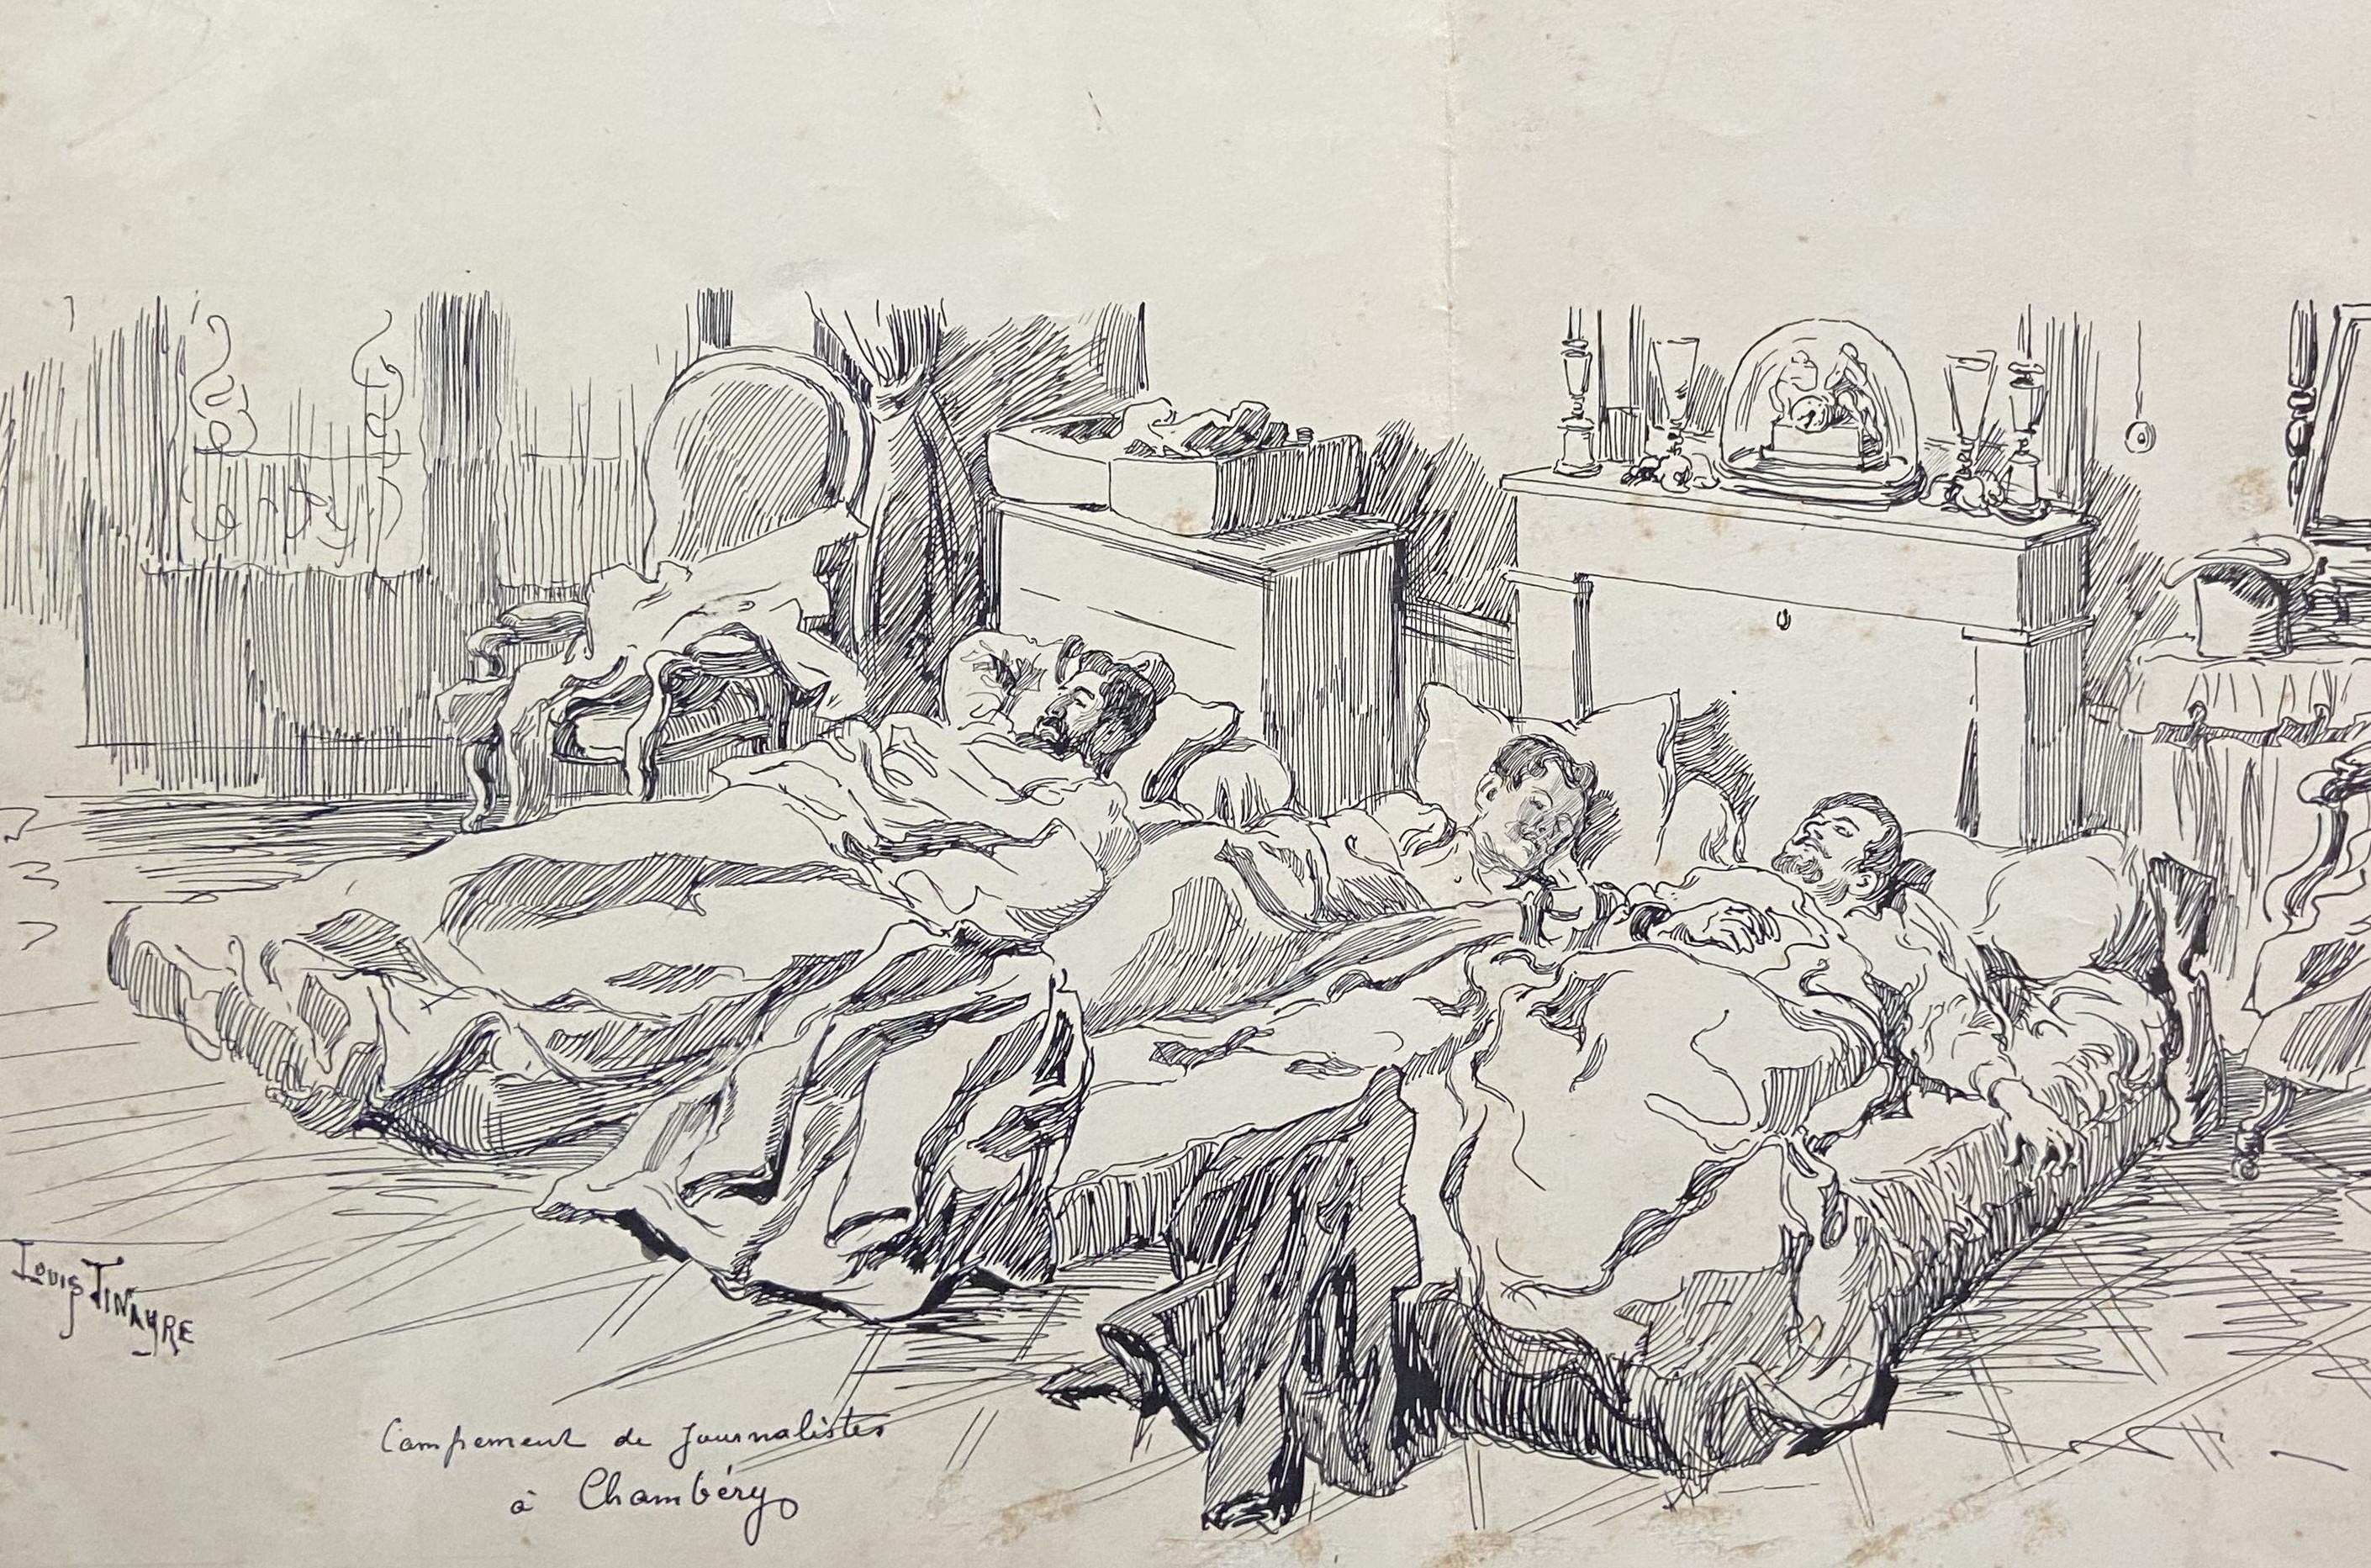 Louis Tinayre (1861-1942) 
An encampment of journalists in Chambéry,
signed and titled lower left "Campement de journalistes à Chambéry"
Ink on paper
In quite good condition, a a visible vertical fold in the centre, some stains and foxings
21 x 29